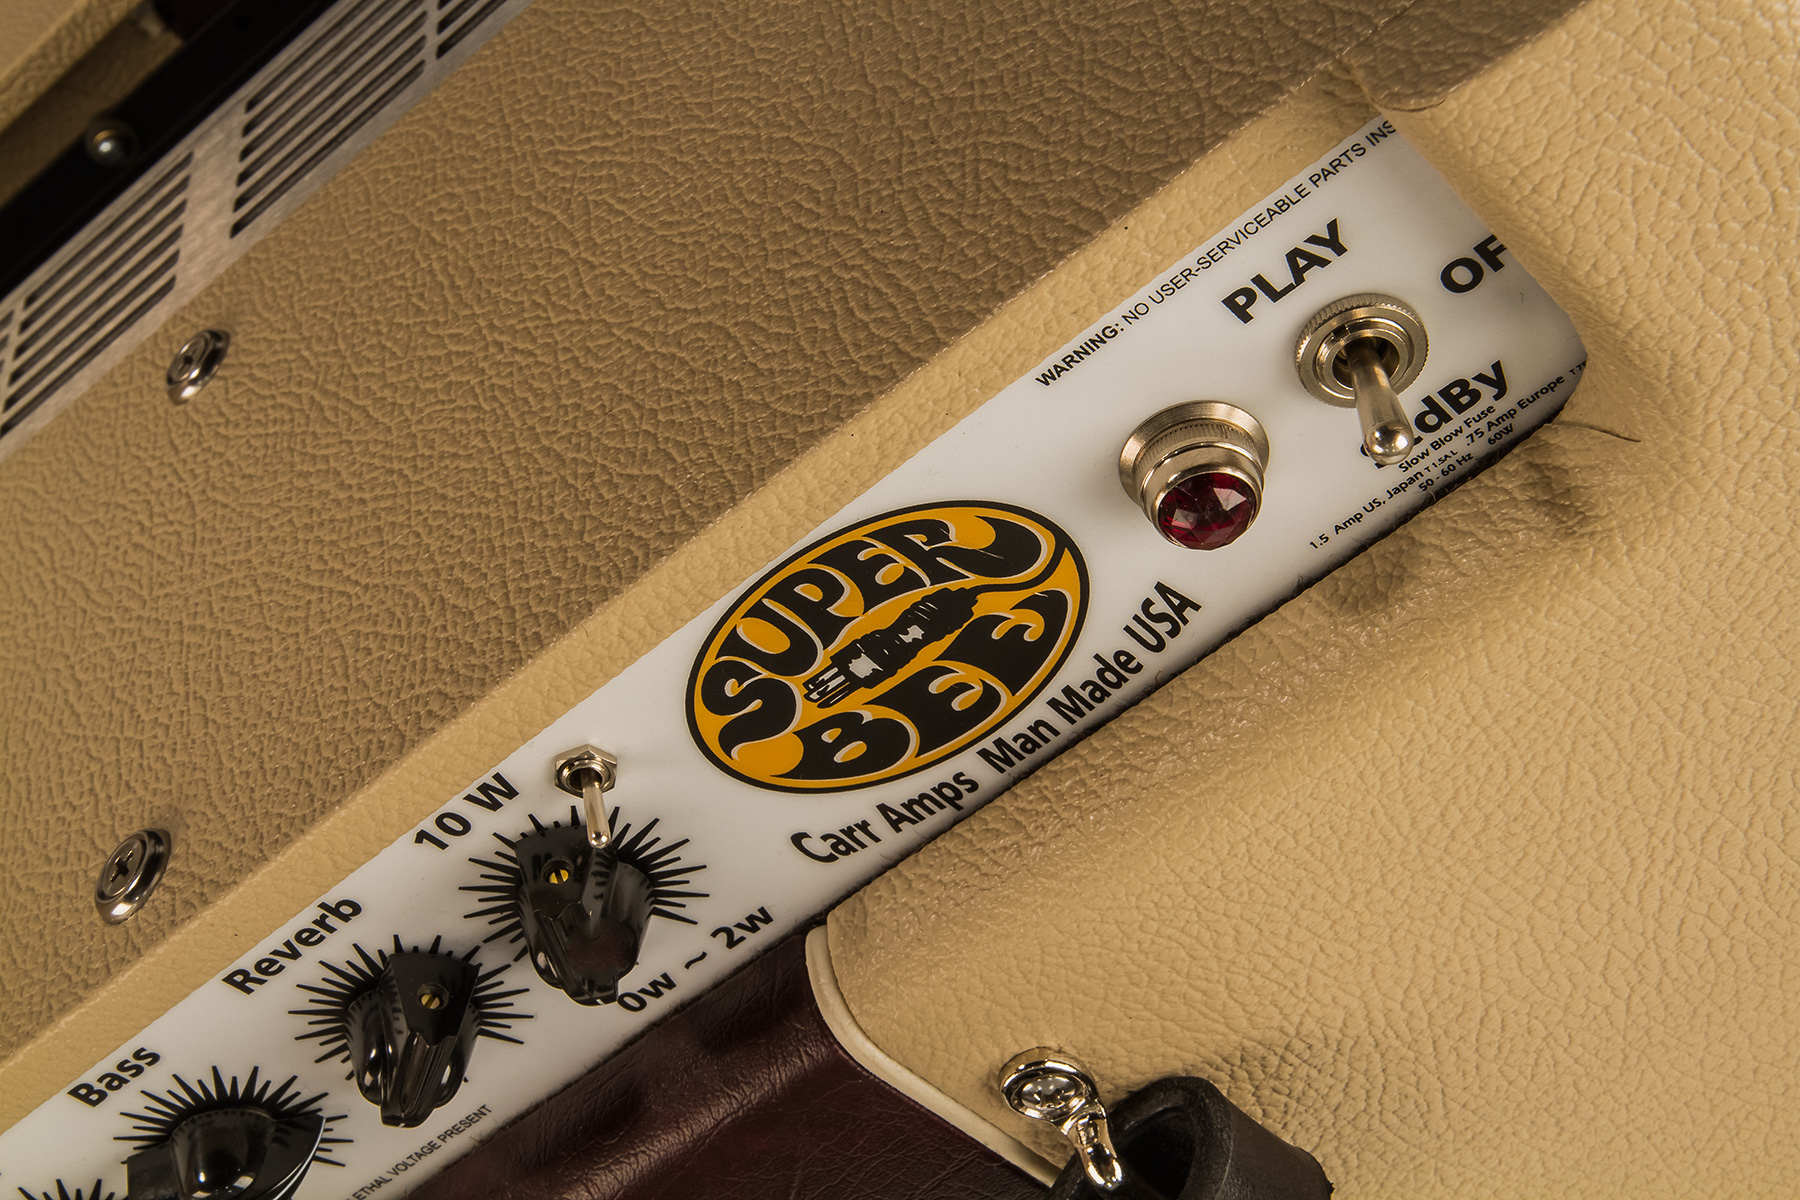 Carr Amplifiers Super Bee 1-12 Combo 10w 1x12 Cream/wine - Electric guitar combo amp - Variation 3